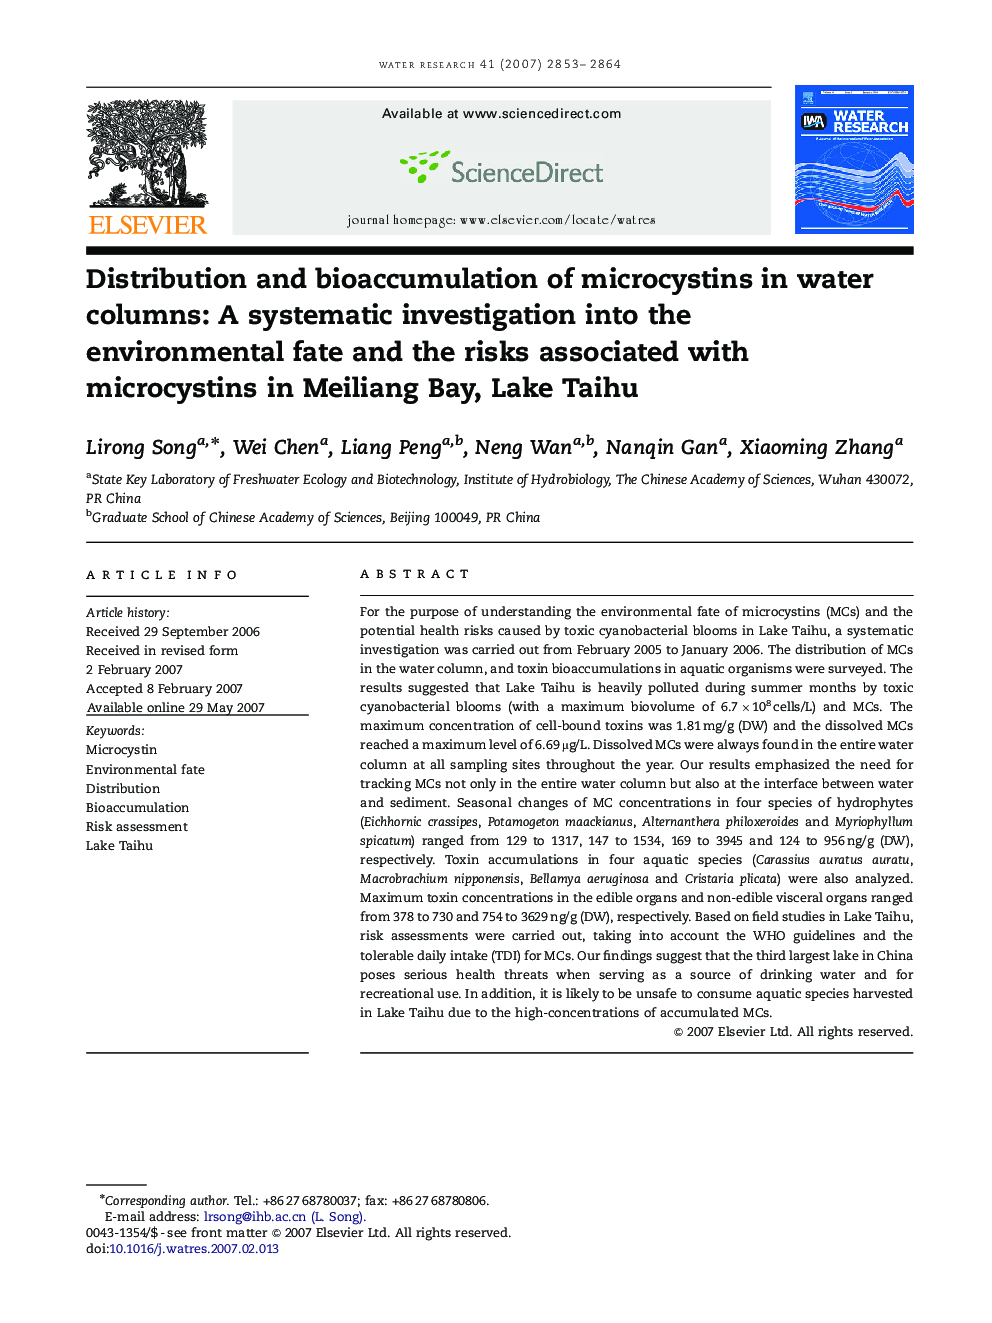 Distribution and bioaccumulation of microcystins in water columns: A systematic investigation into the environmental fate and the risks associated with microcystins in Meiliang Bay, Lake Taihu